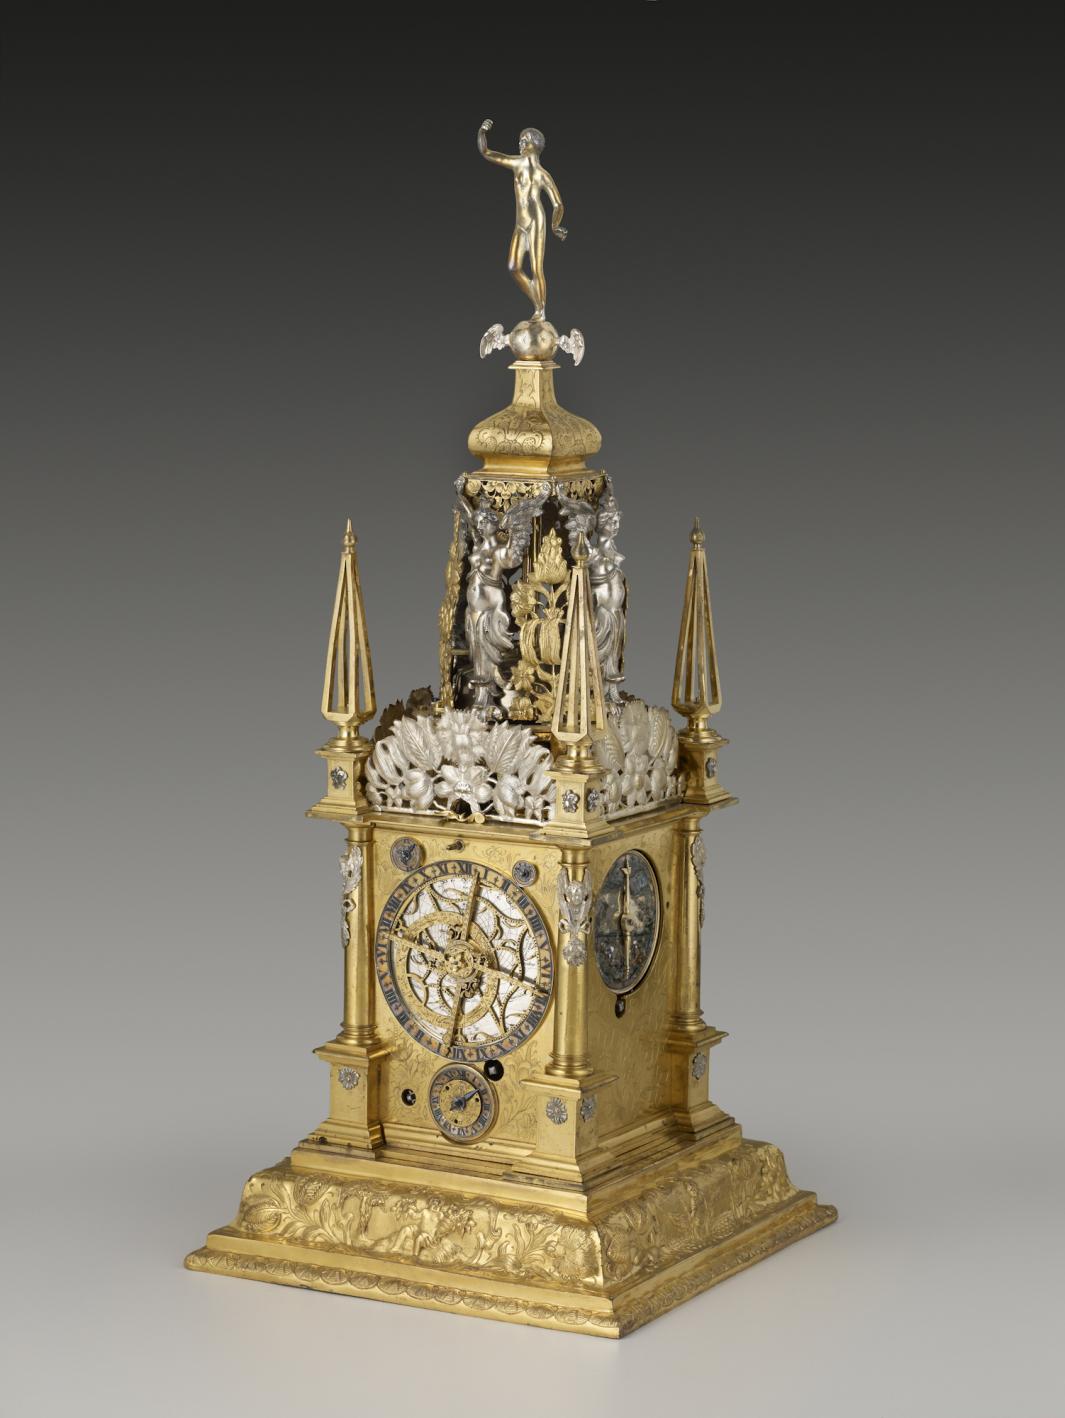 gilt-brass and silver table clock in the shape of a tower, with multiple dials, including astronomical and calendrical dials